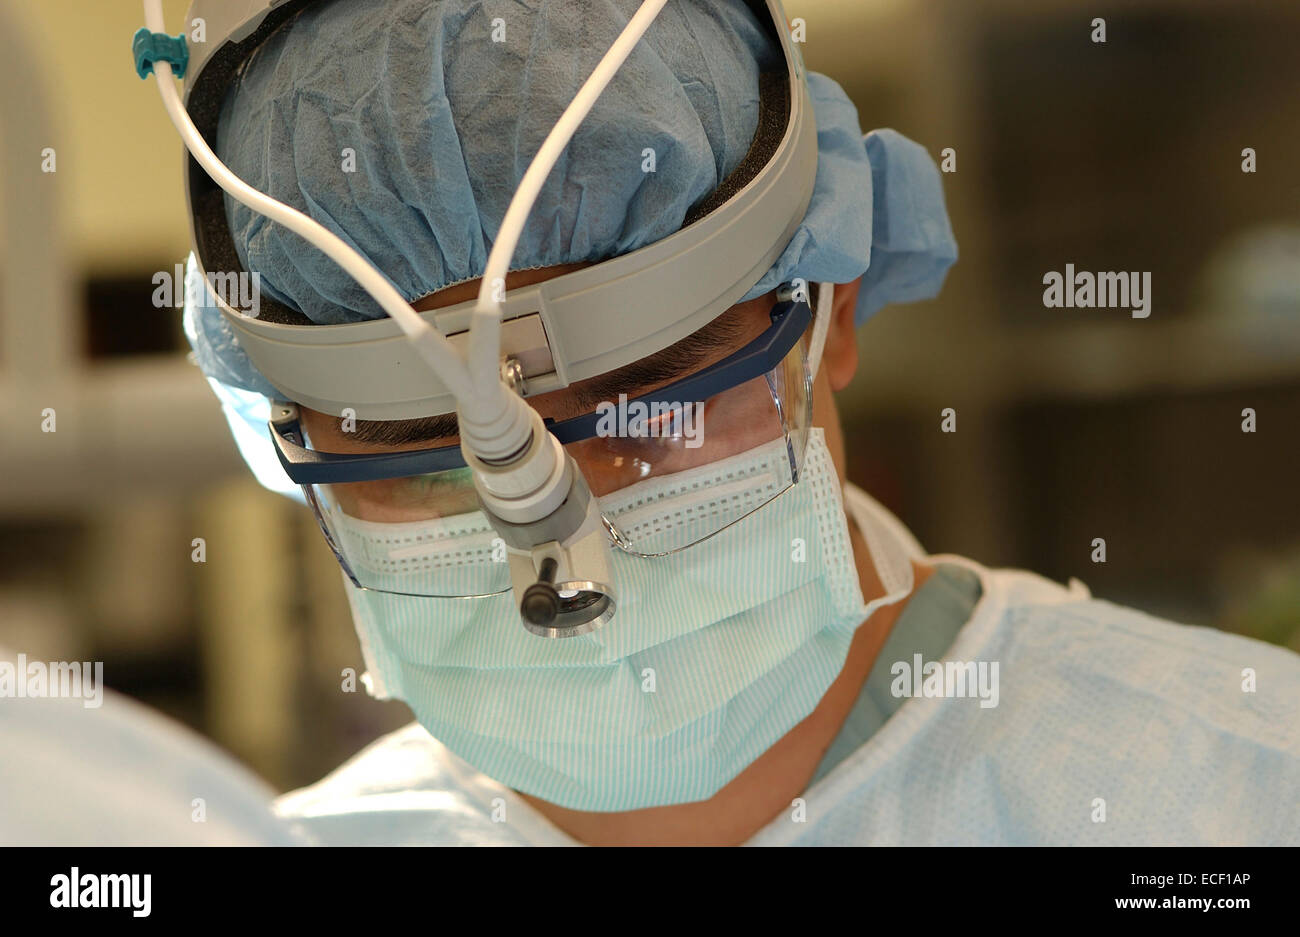 Surgeon wearing a mask during surgery. Stock Photo